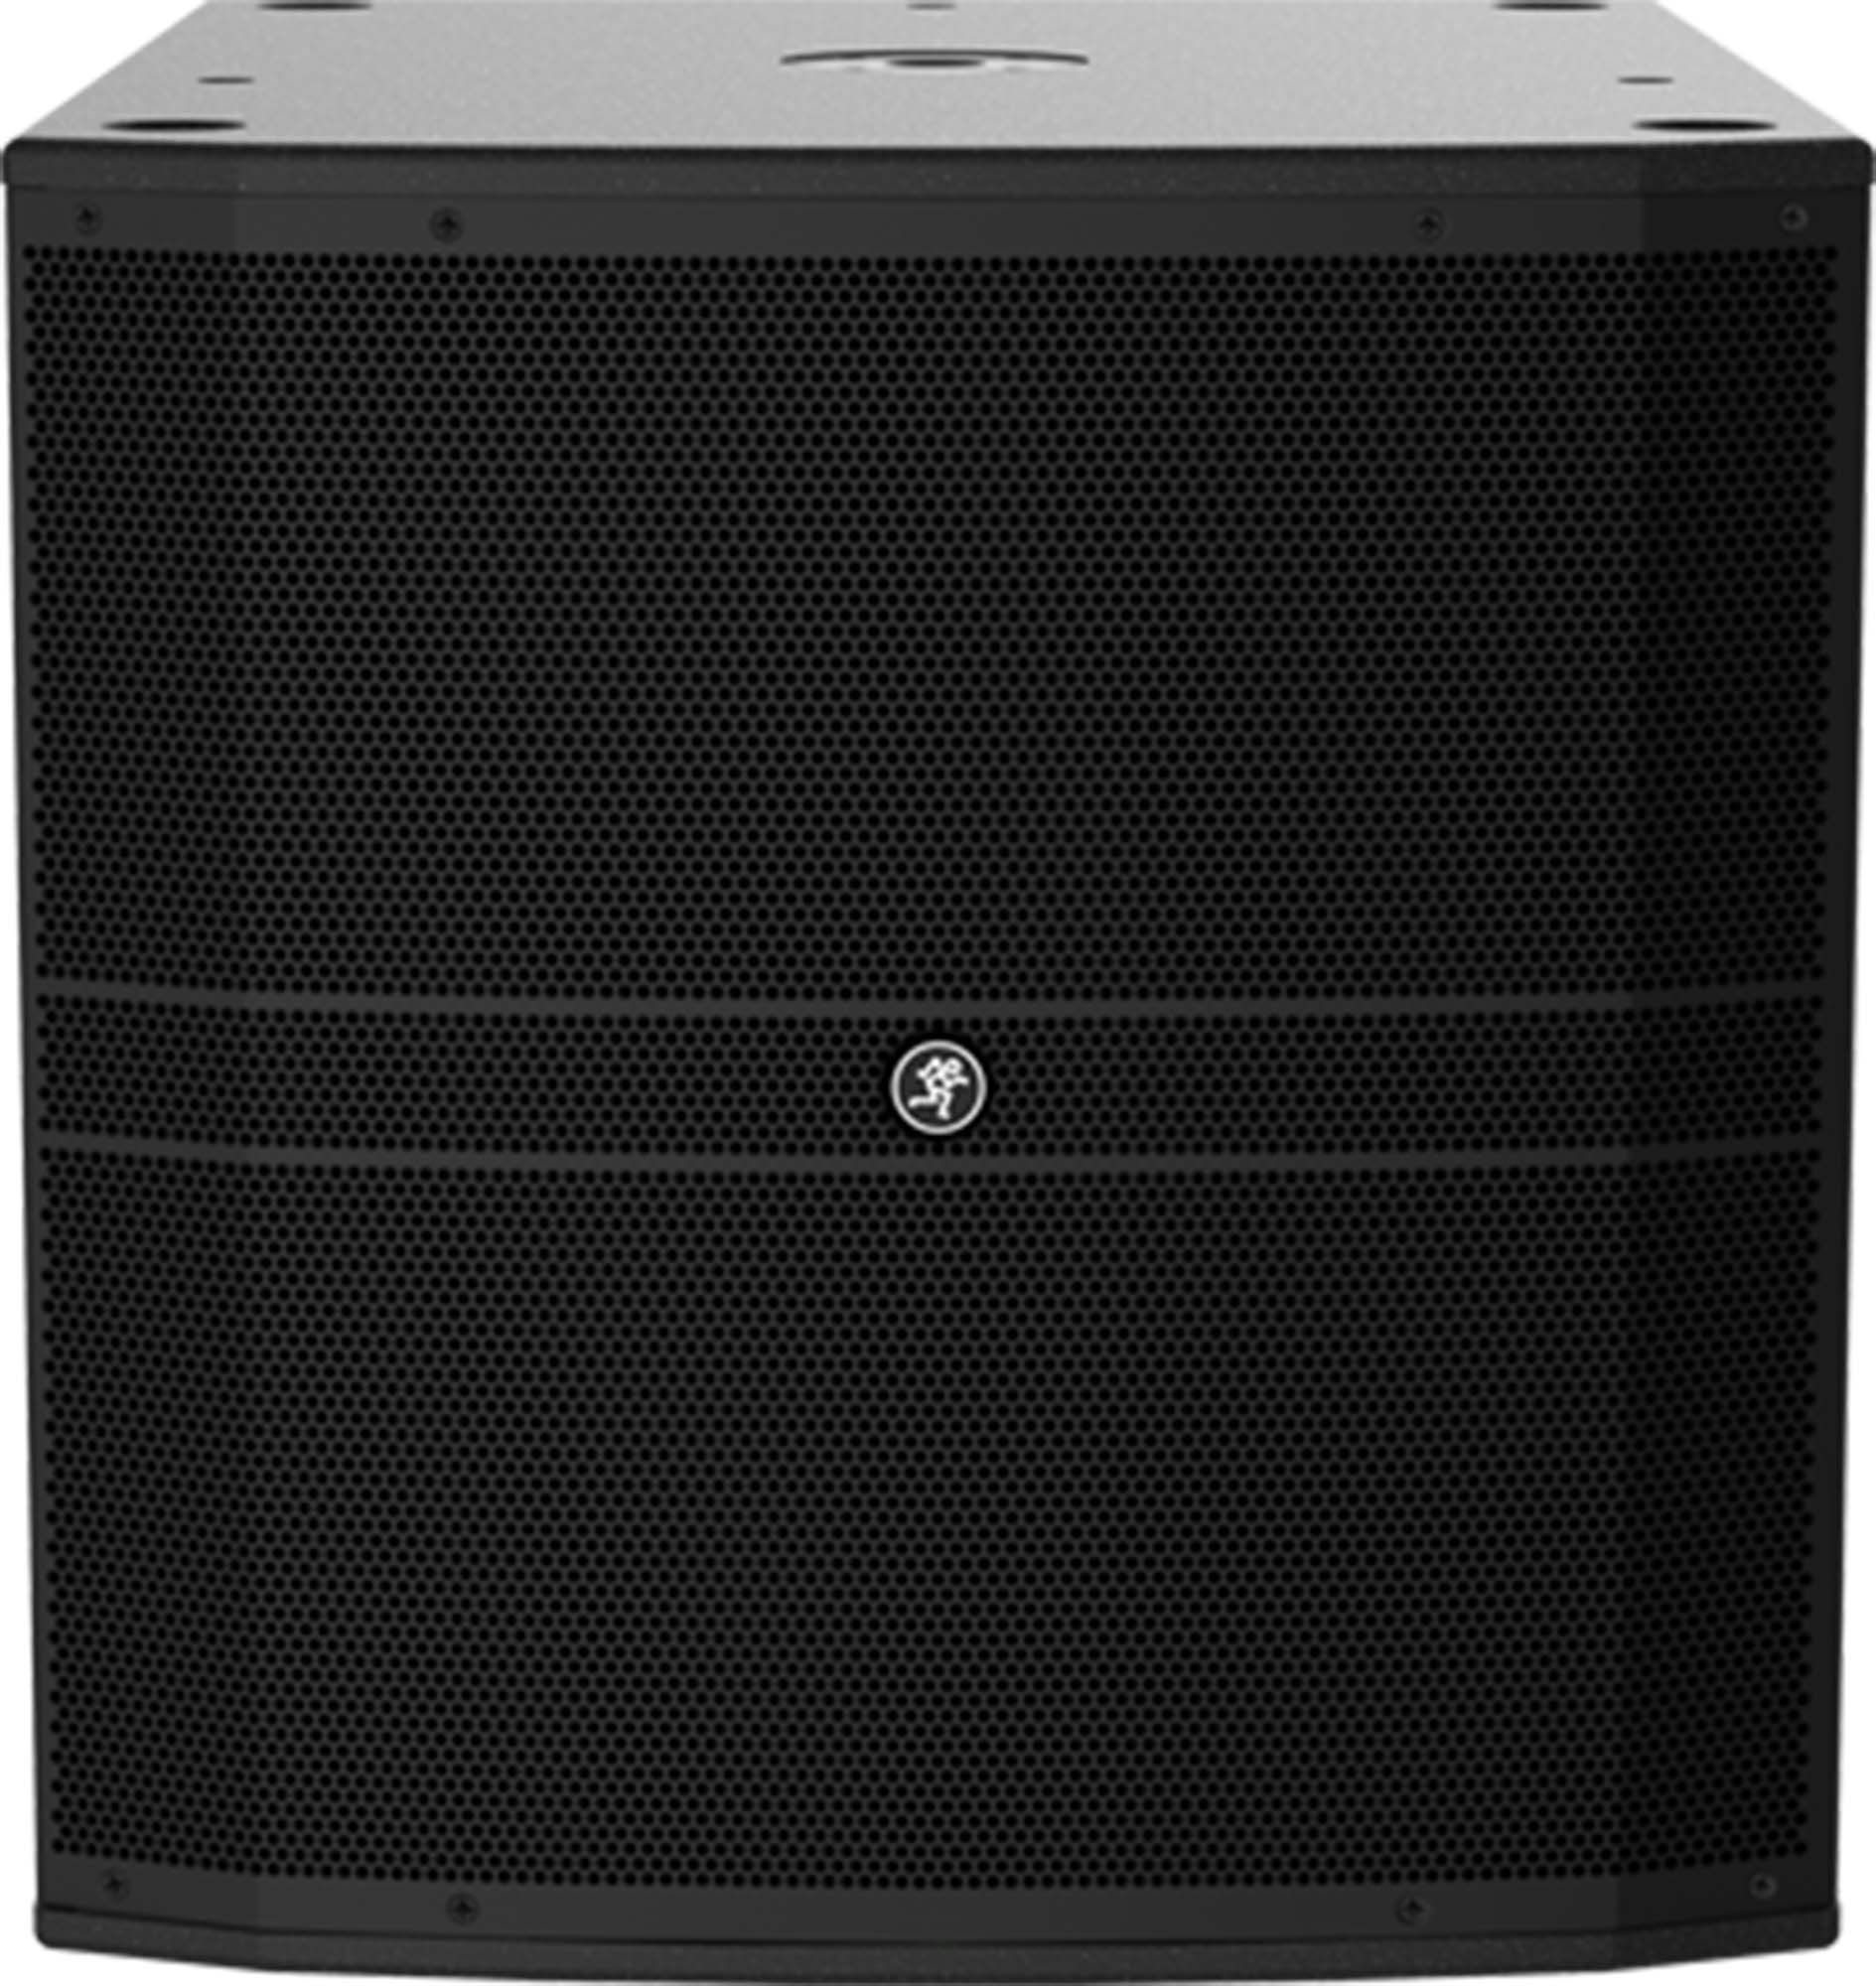 B-Stock: Mackie DRM18S 2000W 18" Professional Powered Subwoofer by Mackie